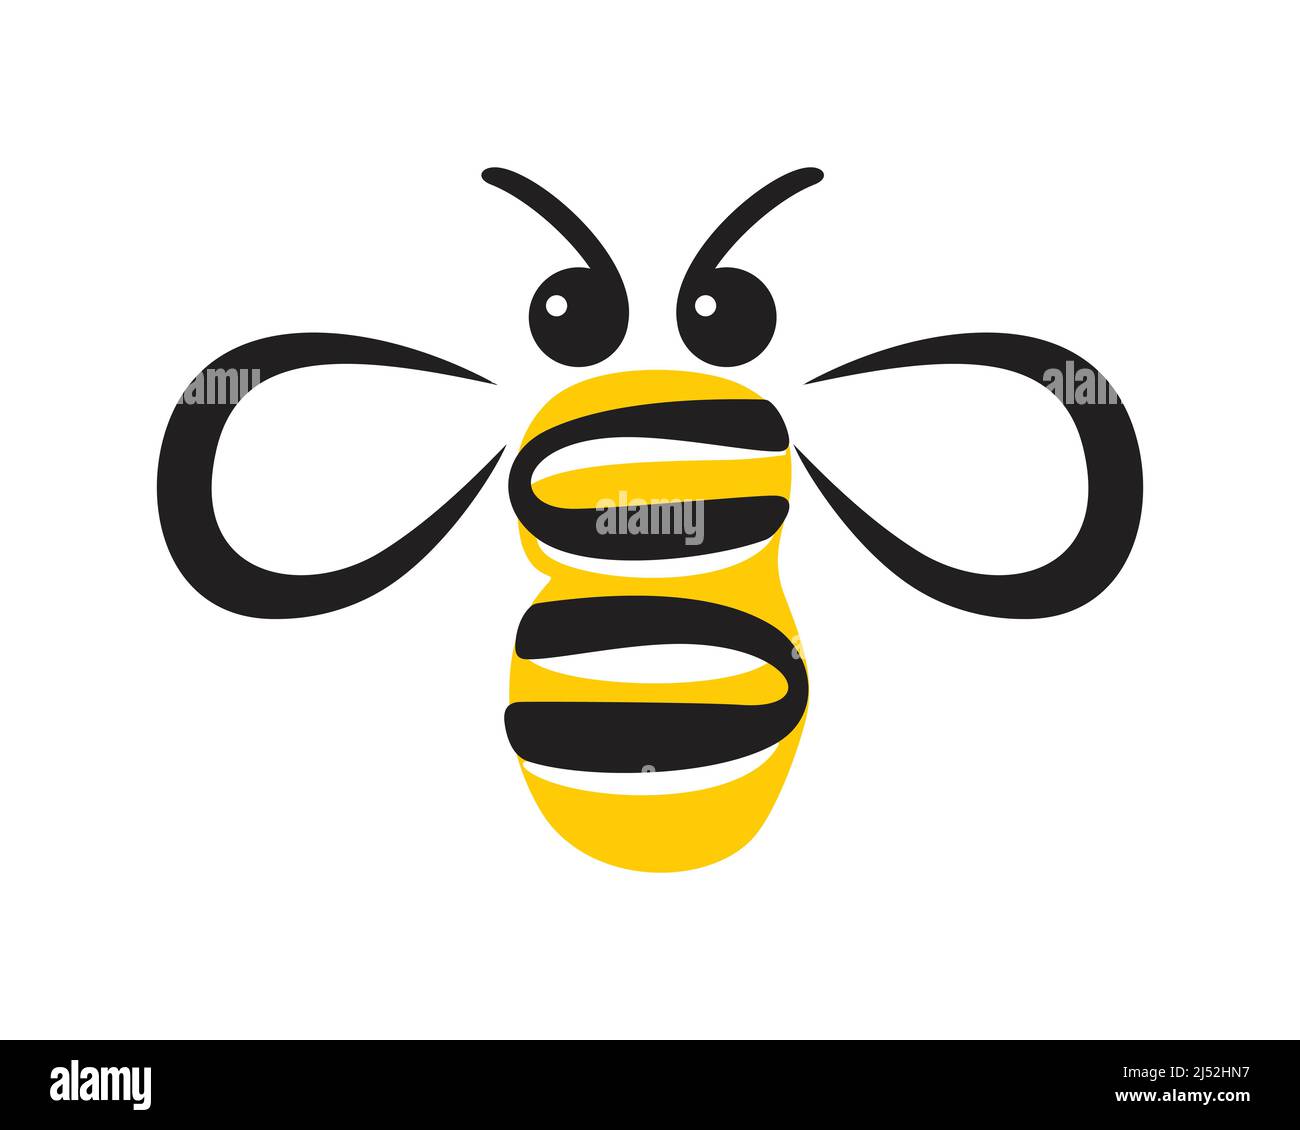 Simple and Creative Flying Bee Symbol Stock Vector